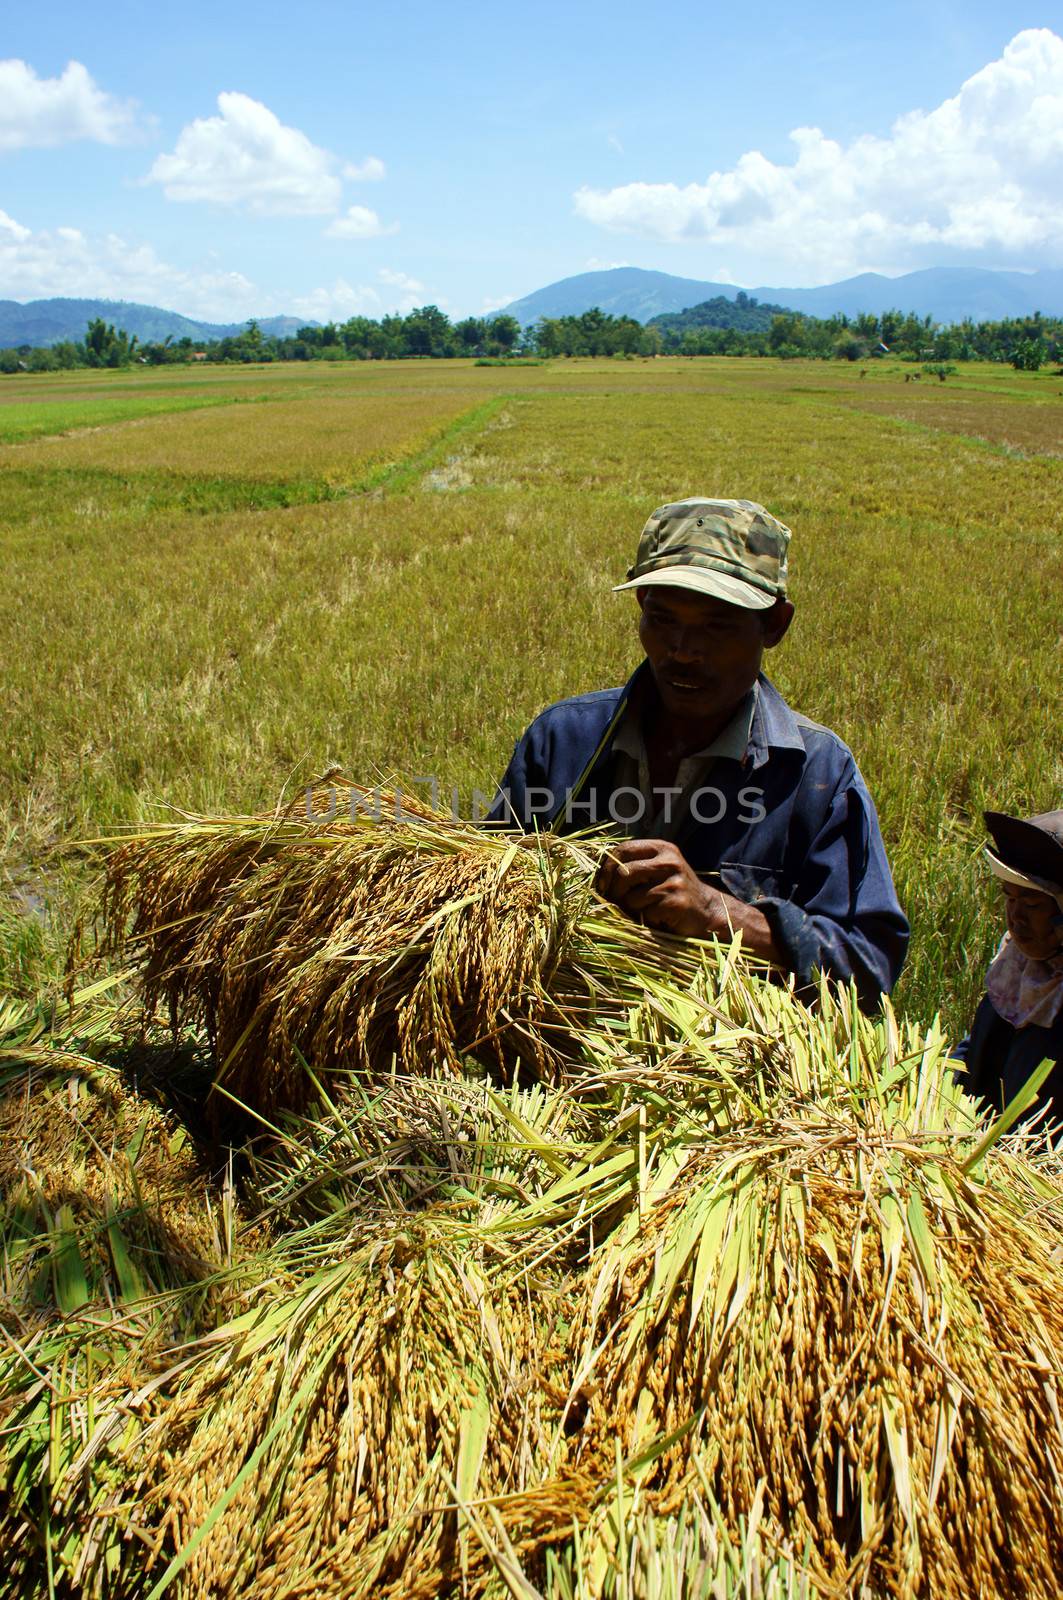 This season is the rains so they can't crop by machines, they have to crop by hand and carry rice with a shoulder pole. Viet Nam- September 03, 2013